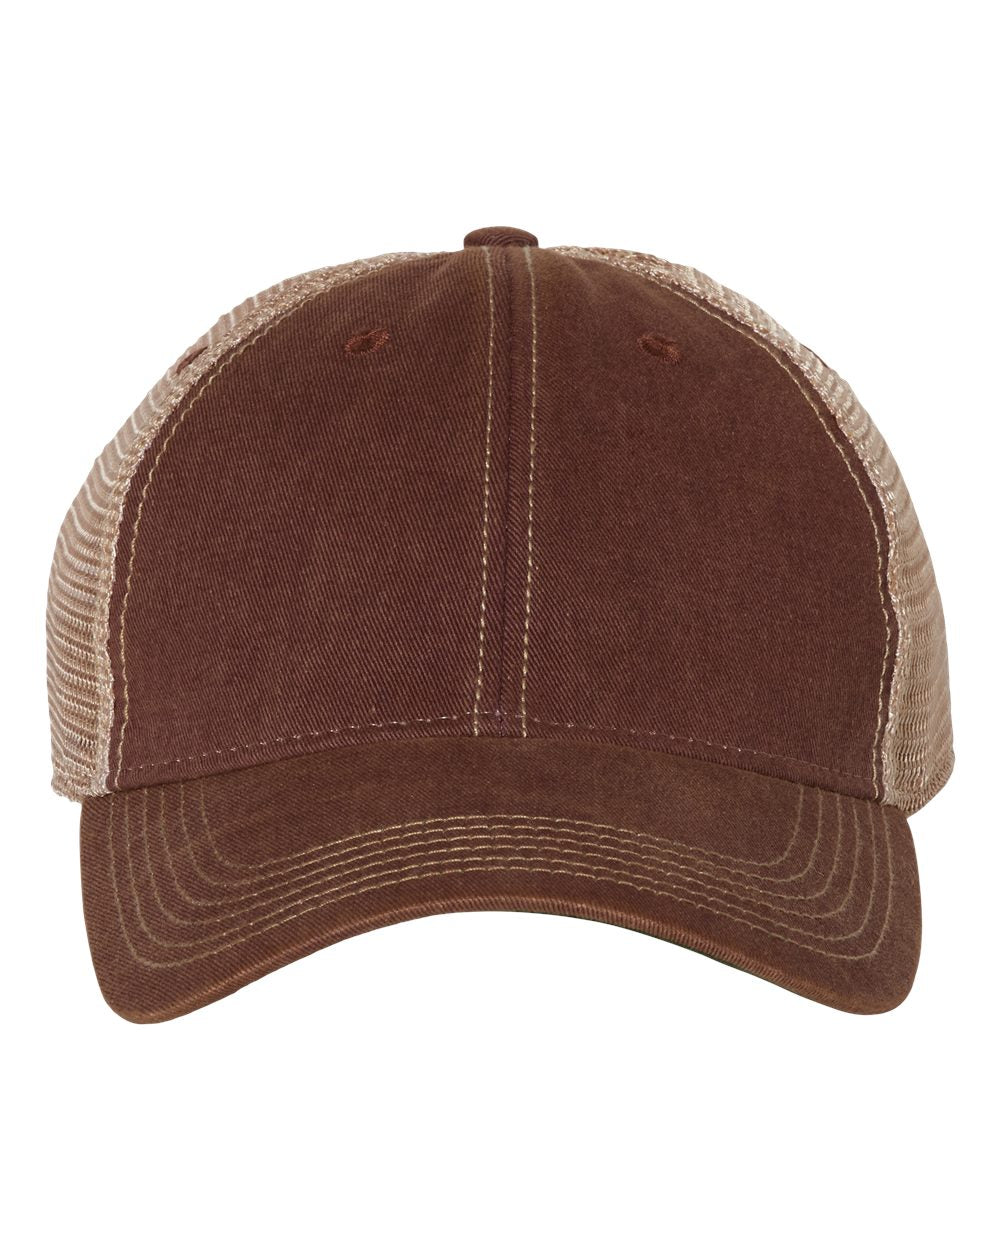 Front view of LEGACY OFA custom hat in burgundy and khaki